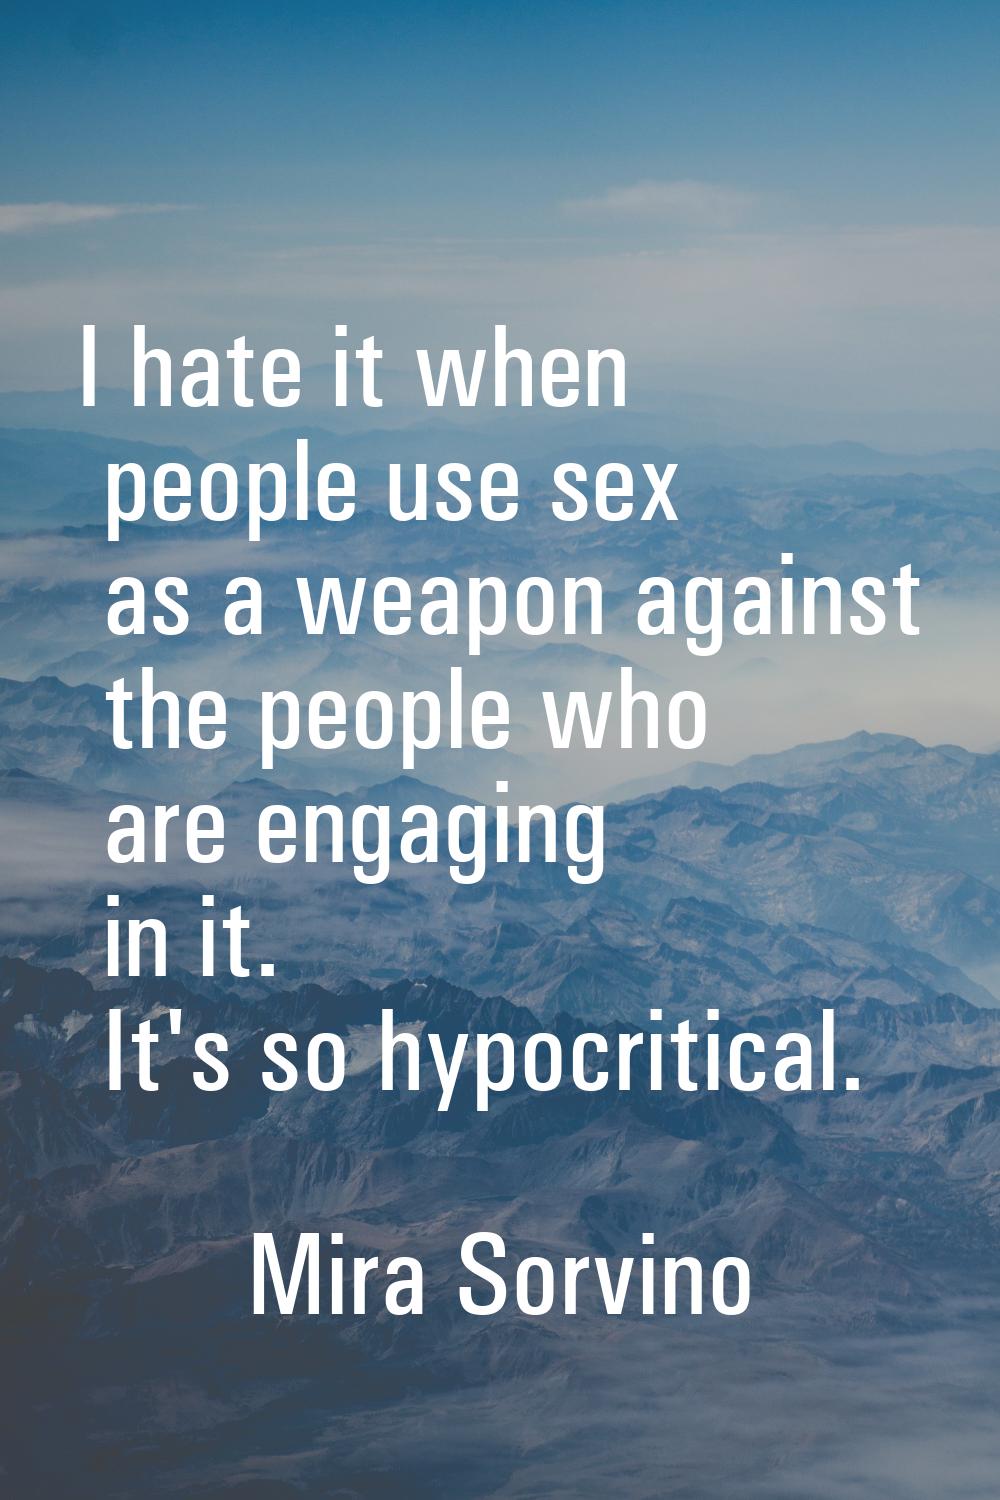 I hate it when people use sex as a weapon against the people who are engaging in it. It's so hypocr